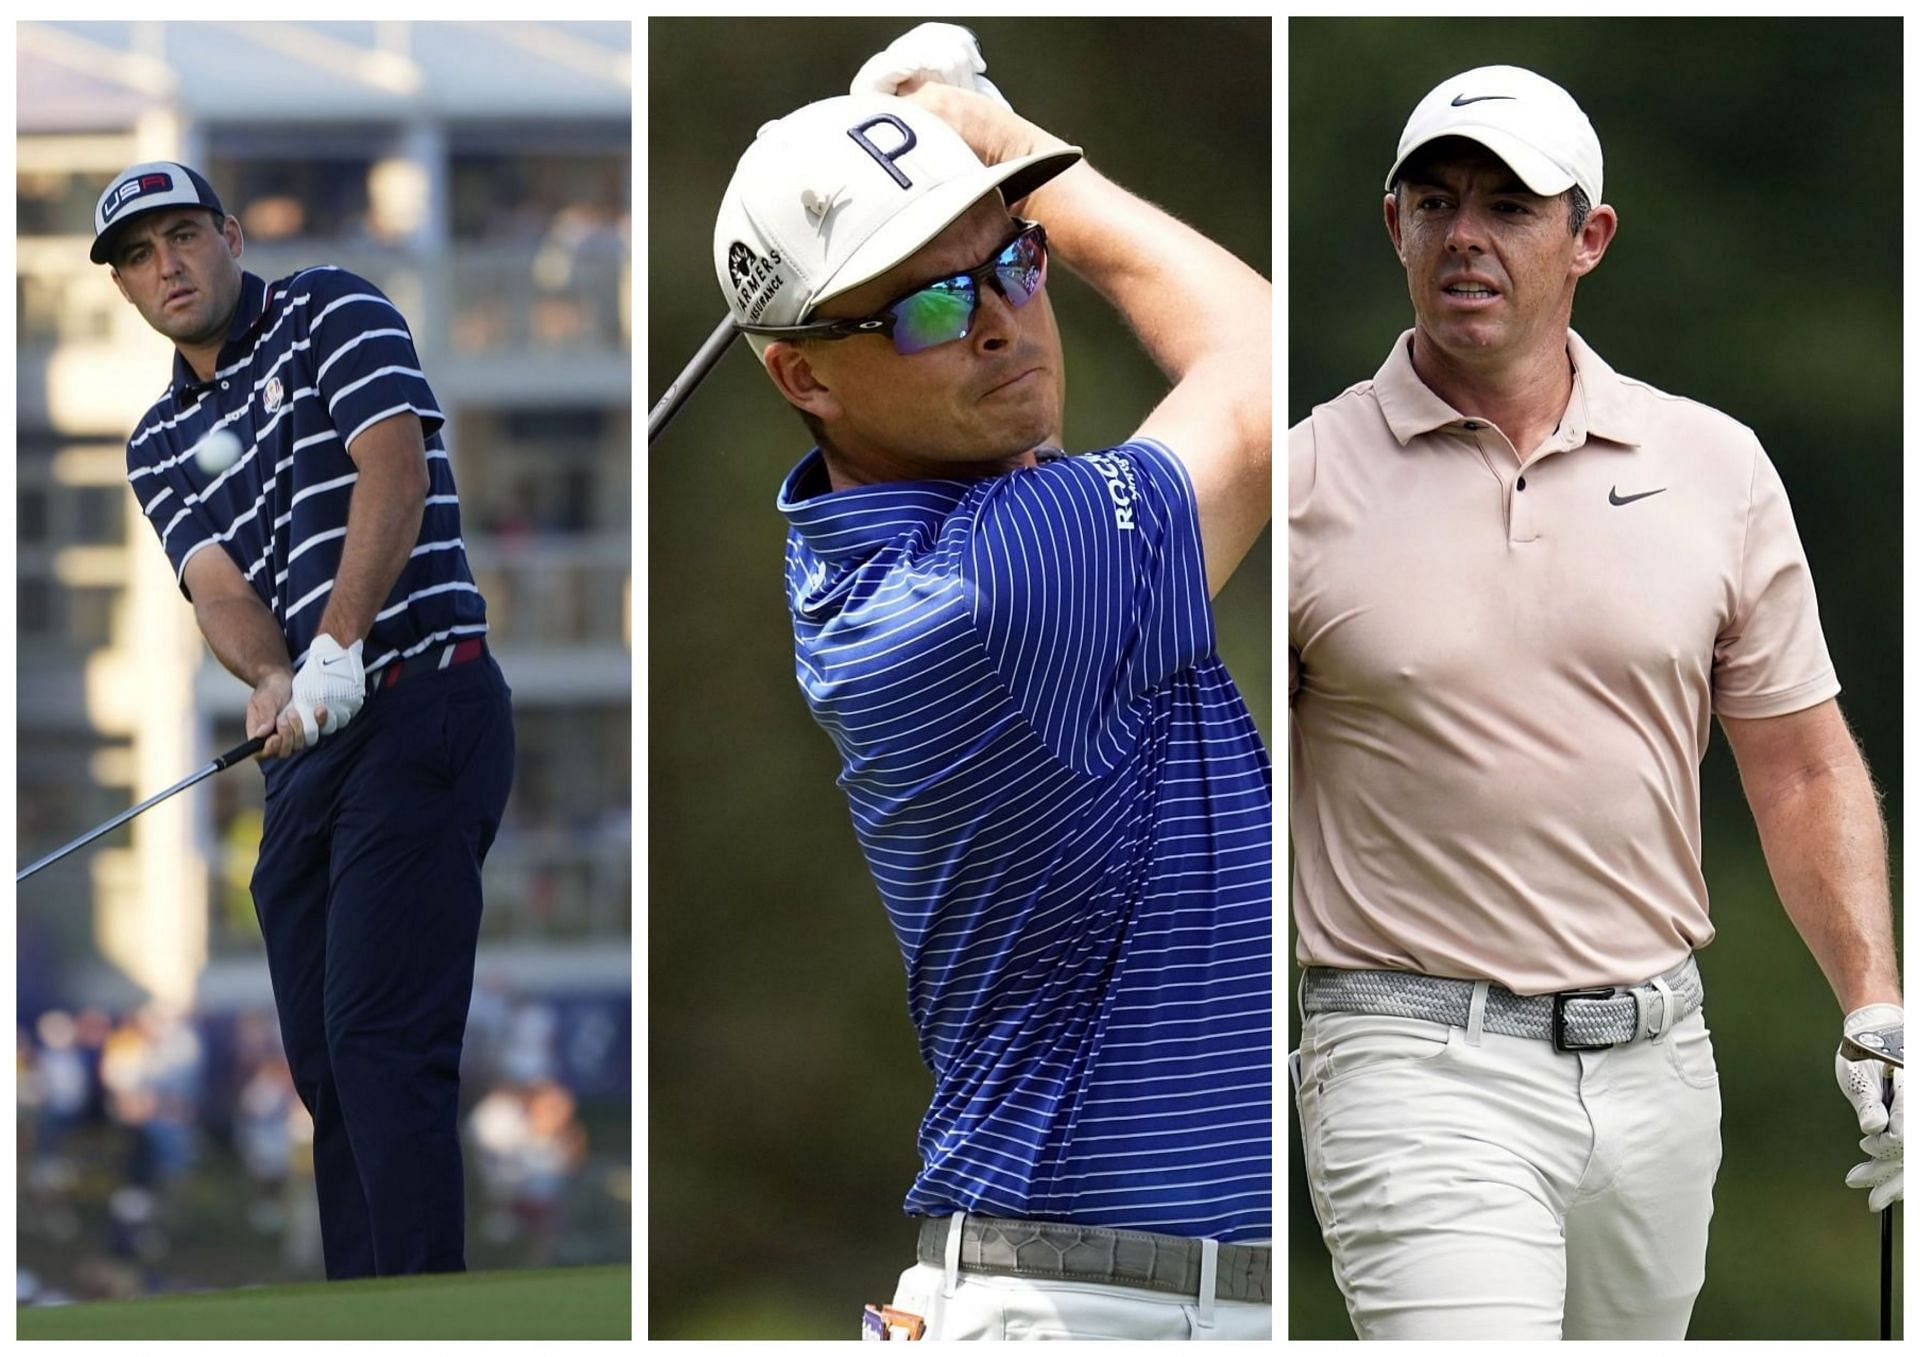 Scottie Scheffler, Rickie Fowler and Rory McIlroy were among the golfer who achieved an ace in PGA Tour 2022-23 season